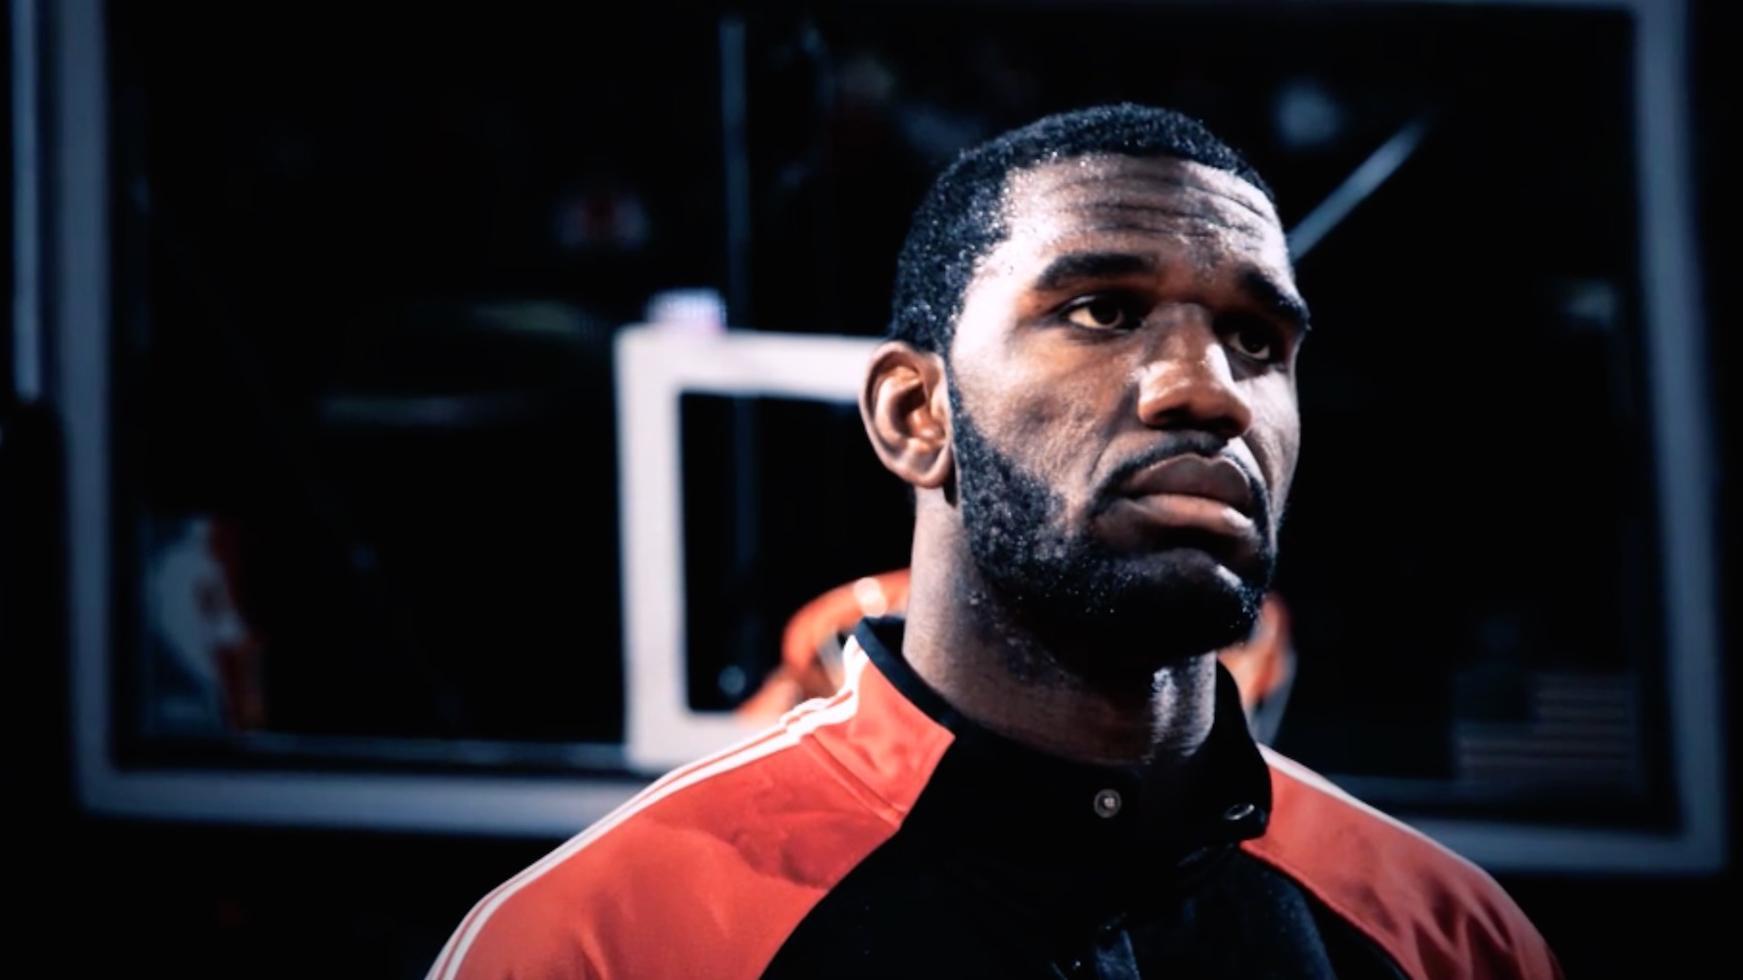 Greg Oden considering NBA comeback attempt, Ohio State coach says